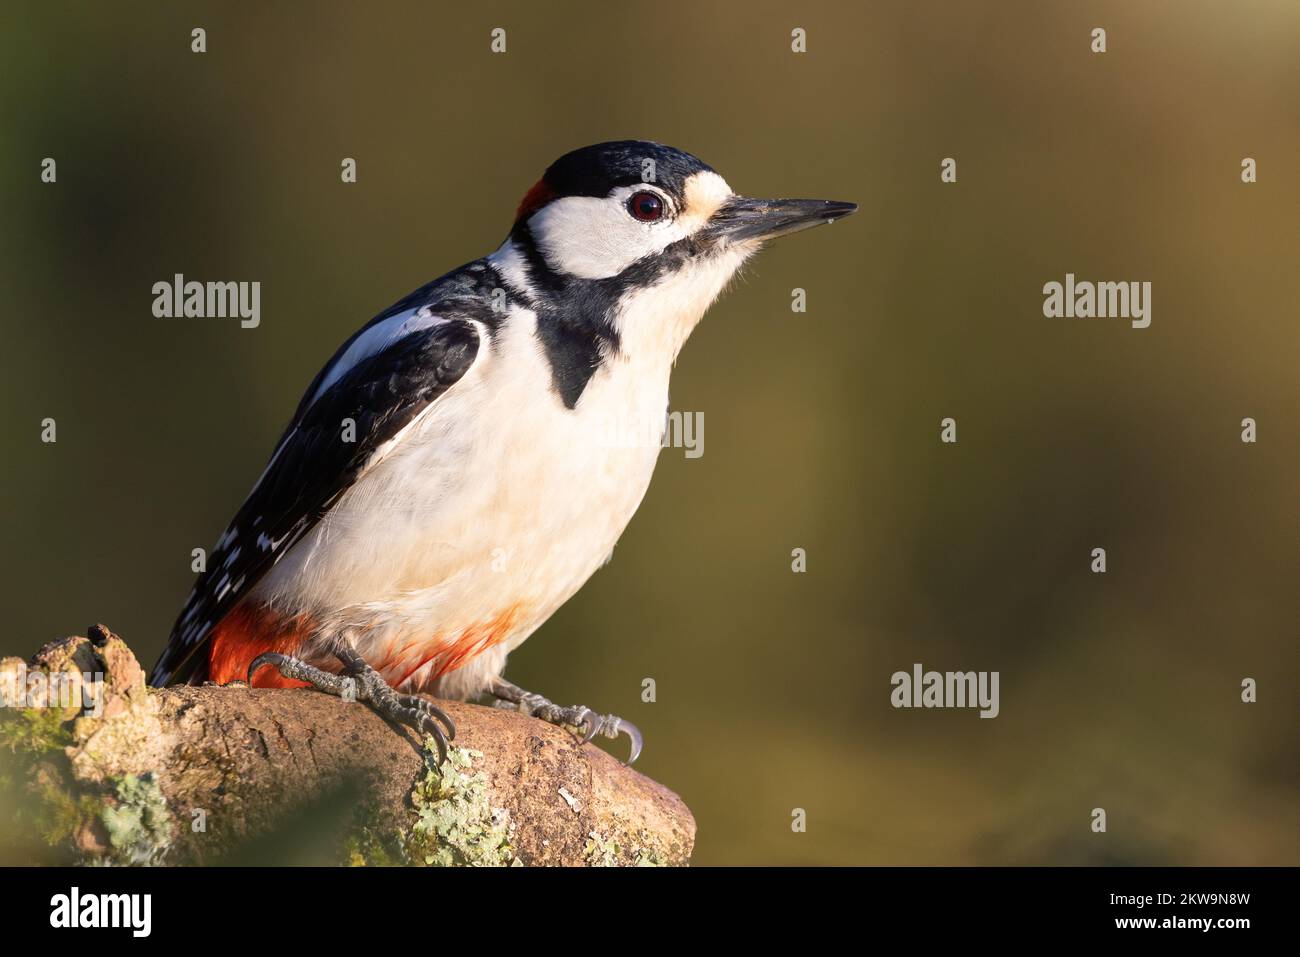 Male Greater spotted woodpecker [ Dendrocopos major ] on stumpwith out of focus foreground and background Stock Photo